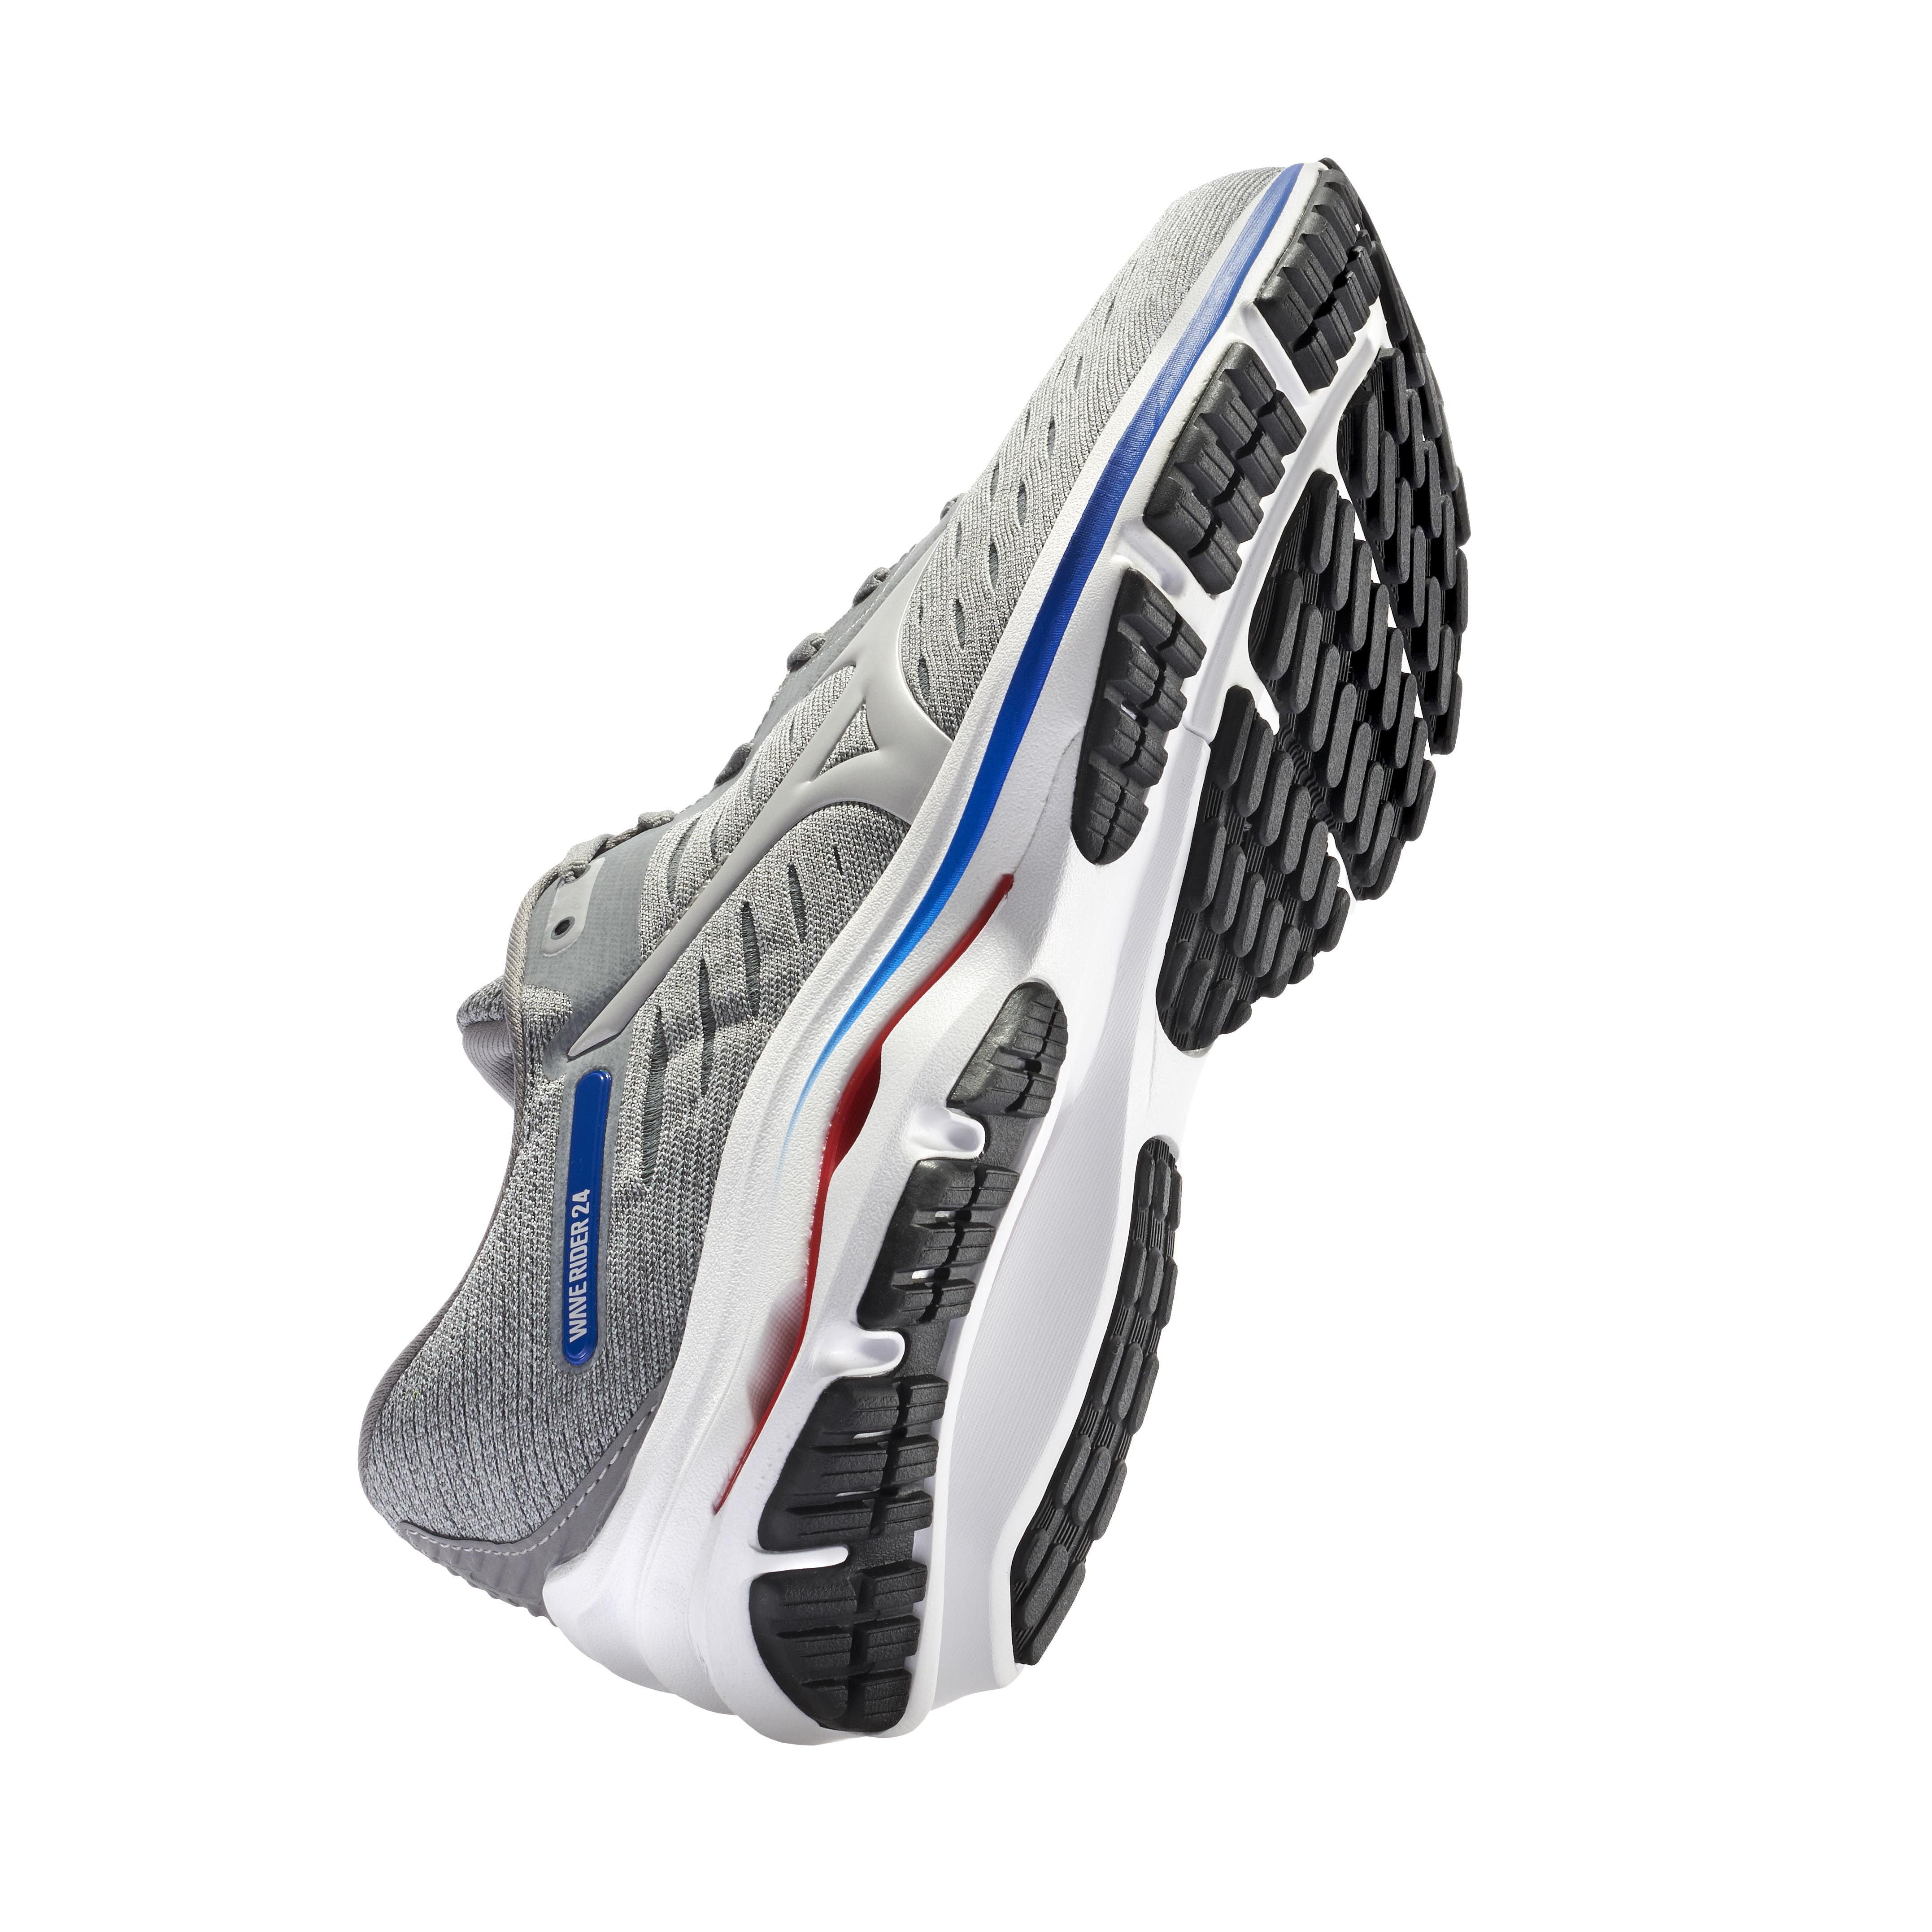 8mm running shoes